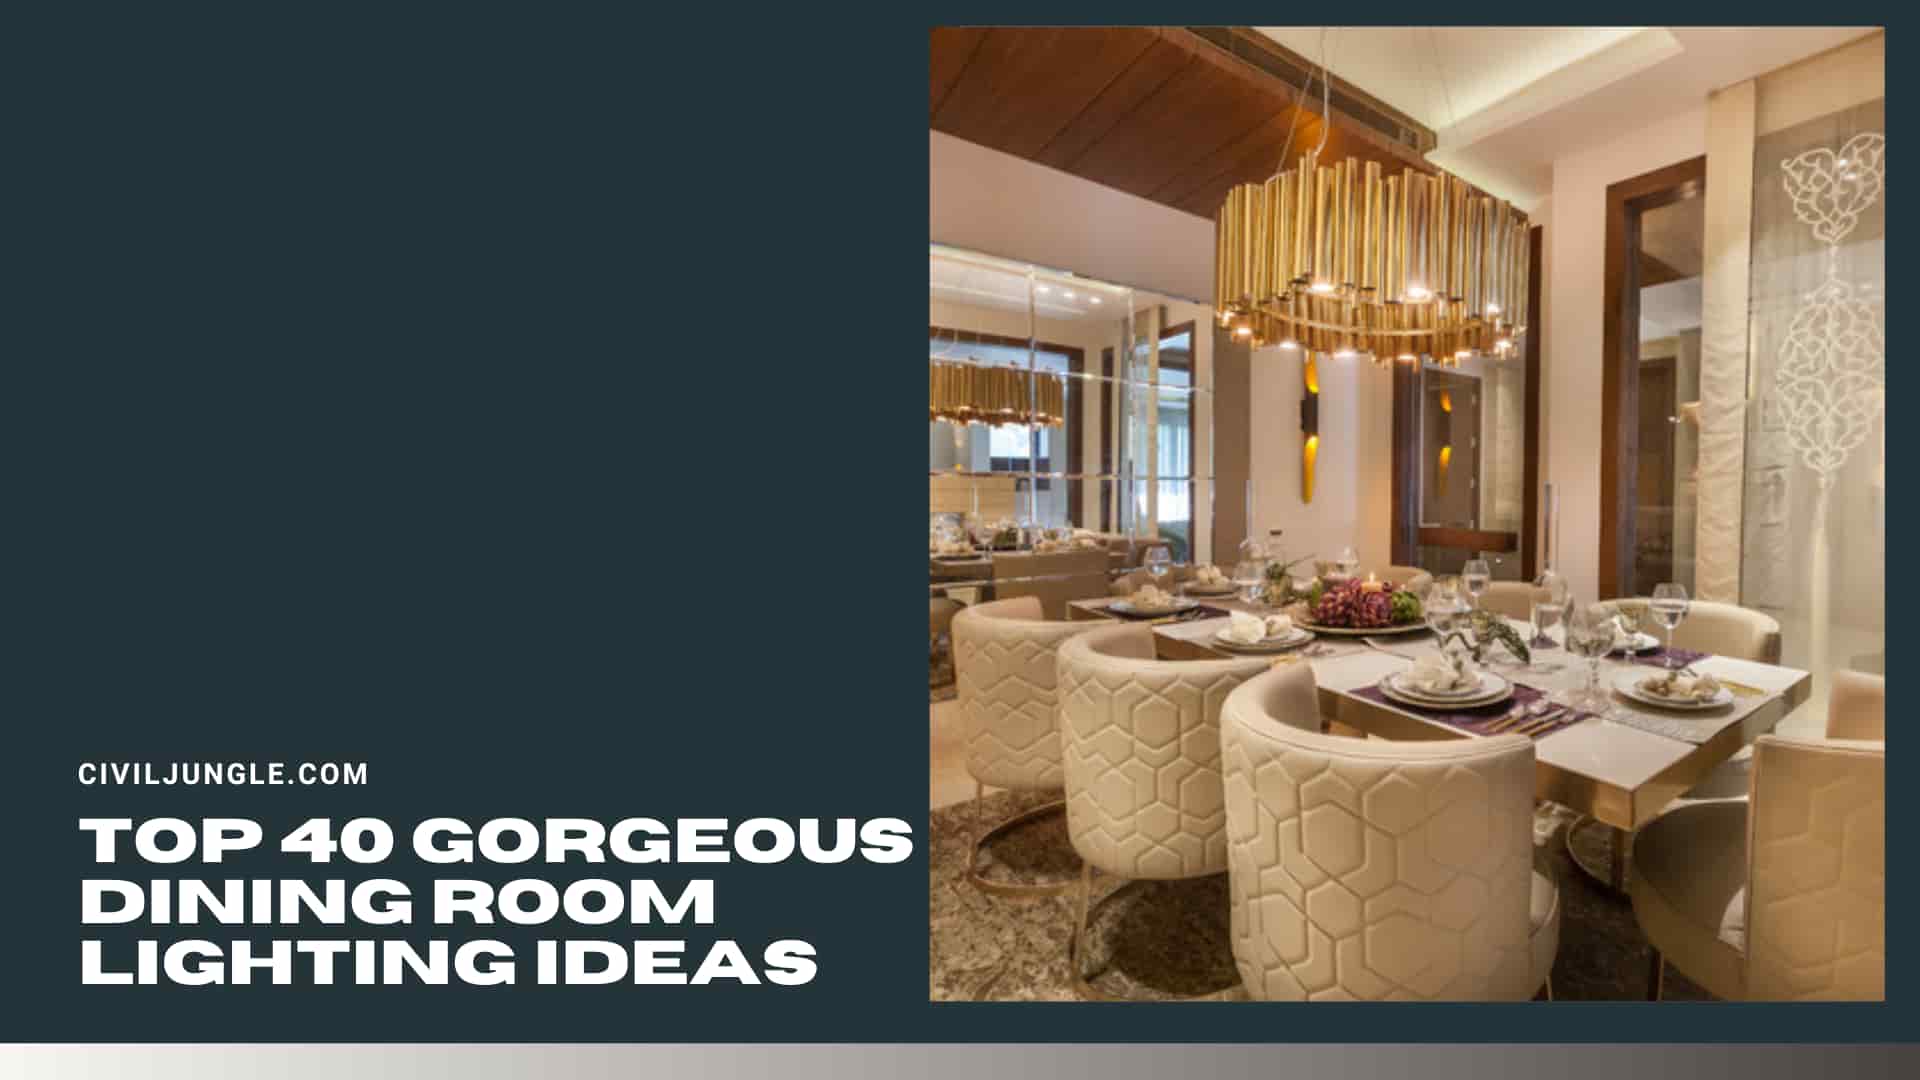 Top 40 Gorgeous Dining Room Lighting Ideas